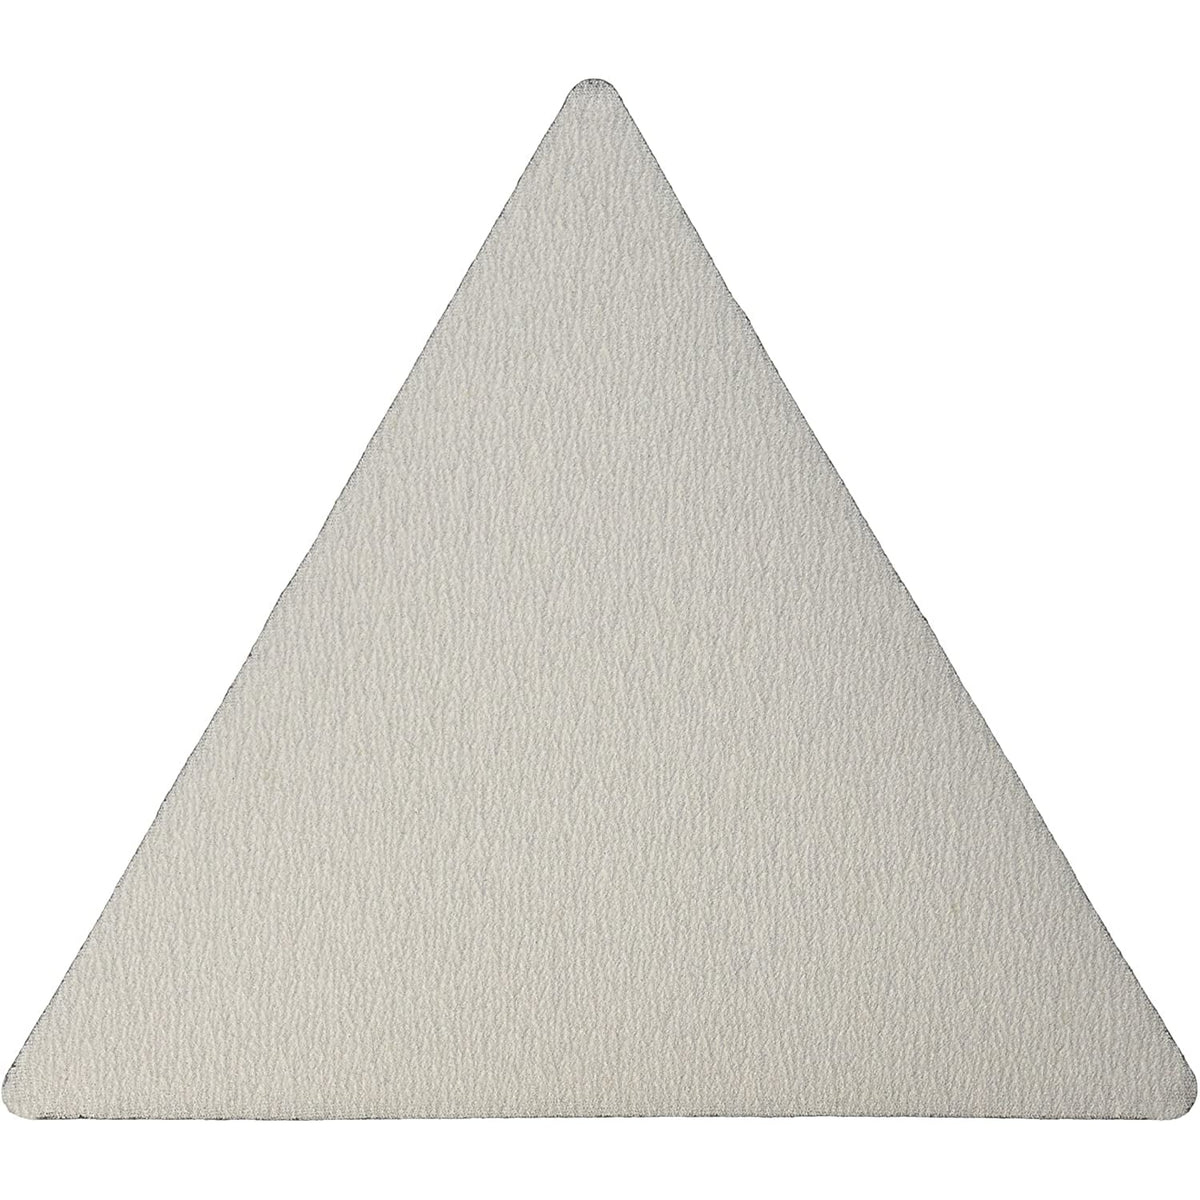 Full Circle International Inc. TG150 Level180 Sandpaper Triangles 150 Grit 5-Pack - The Paint People